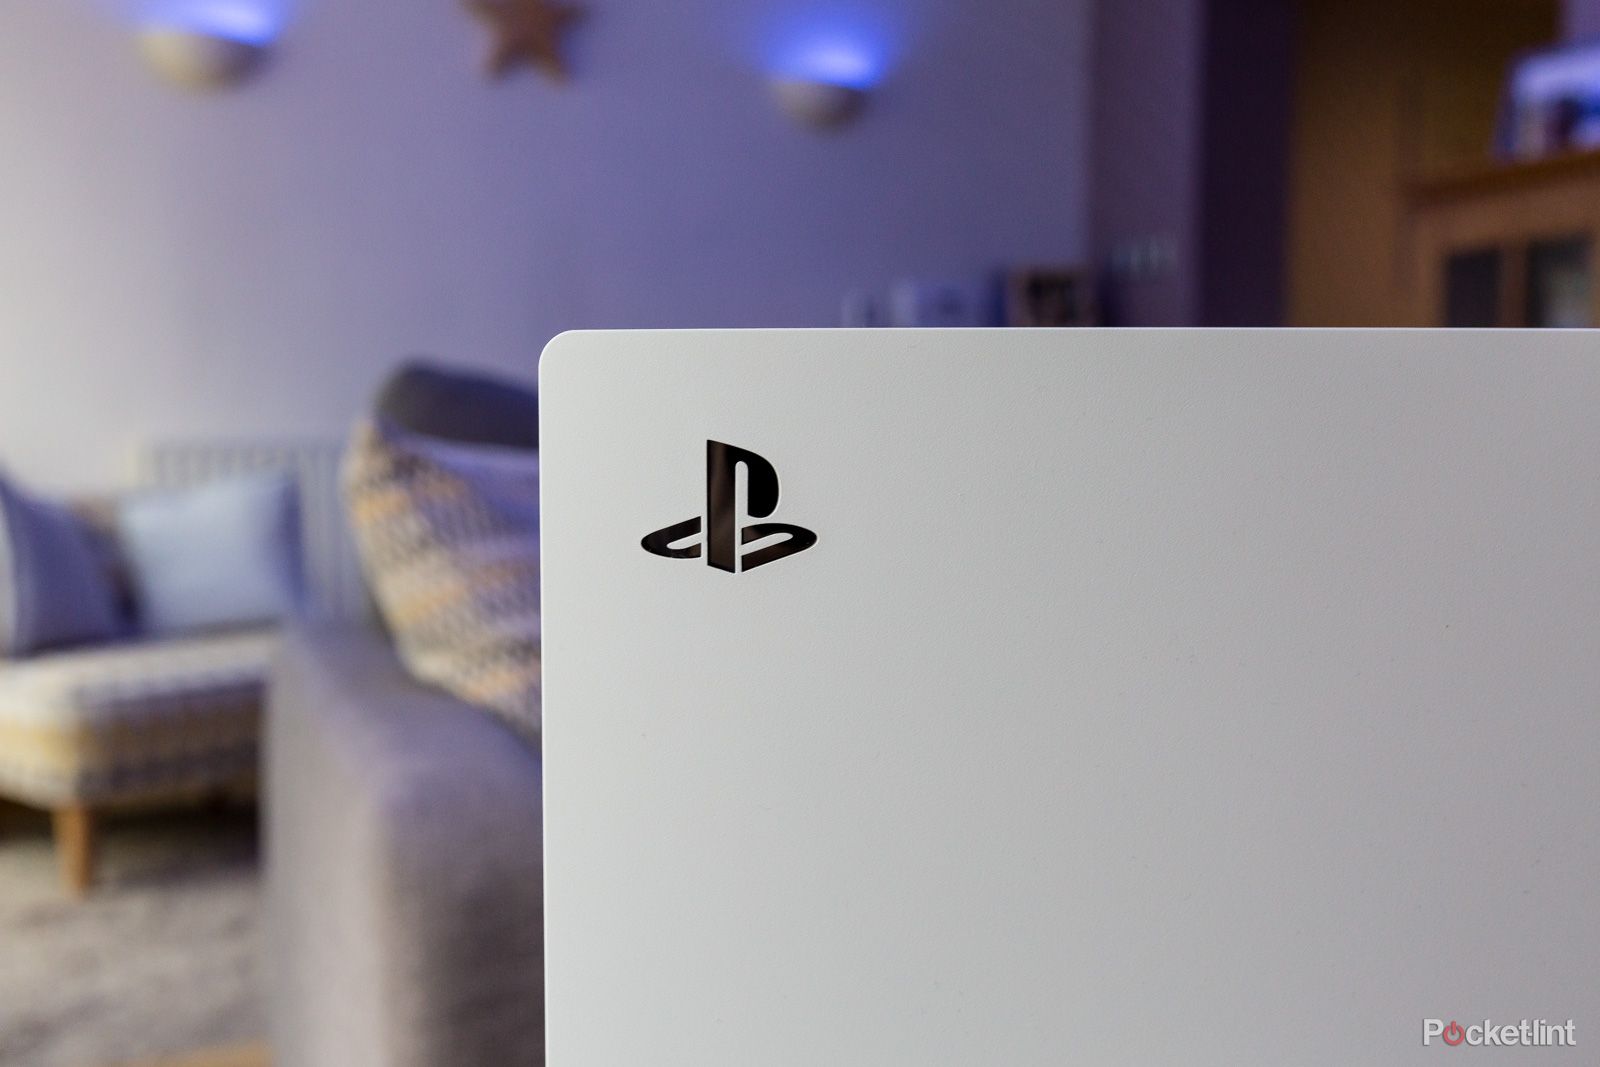 How to change your PSN online ID